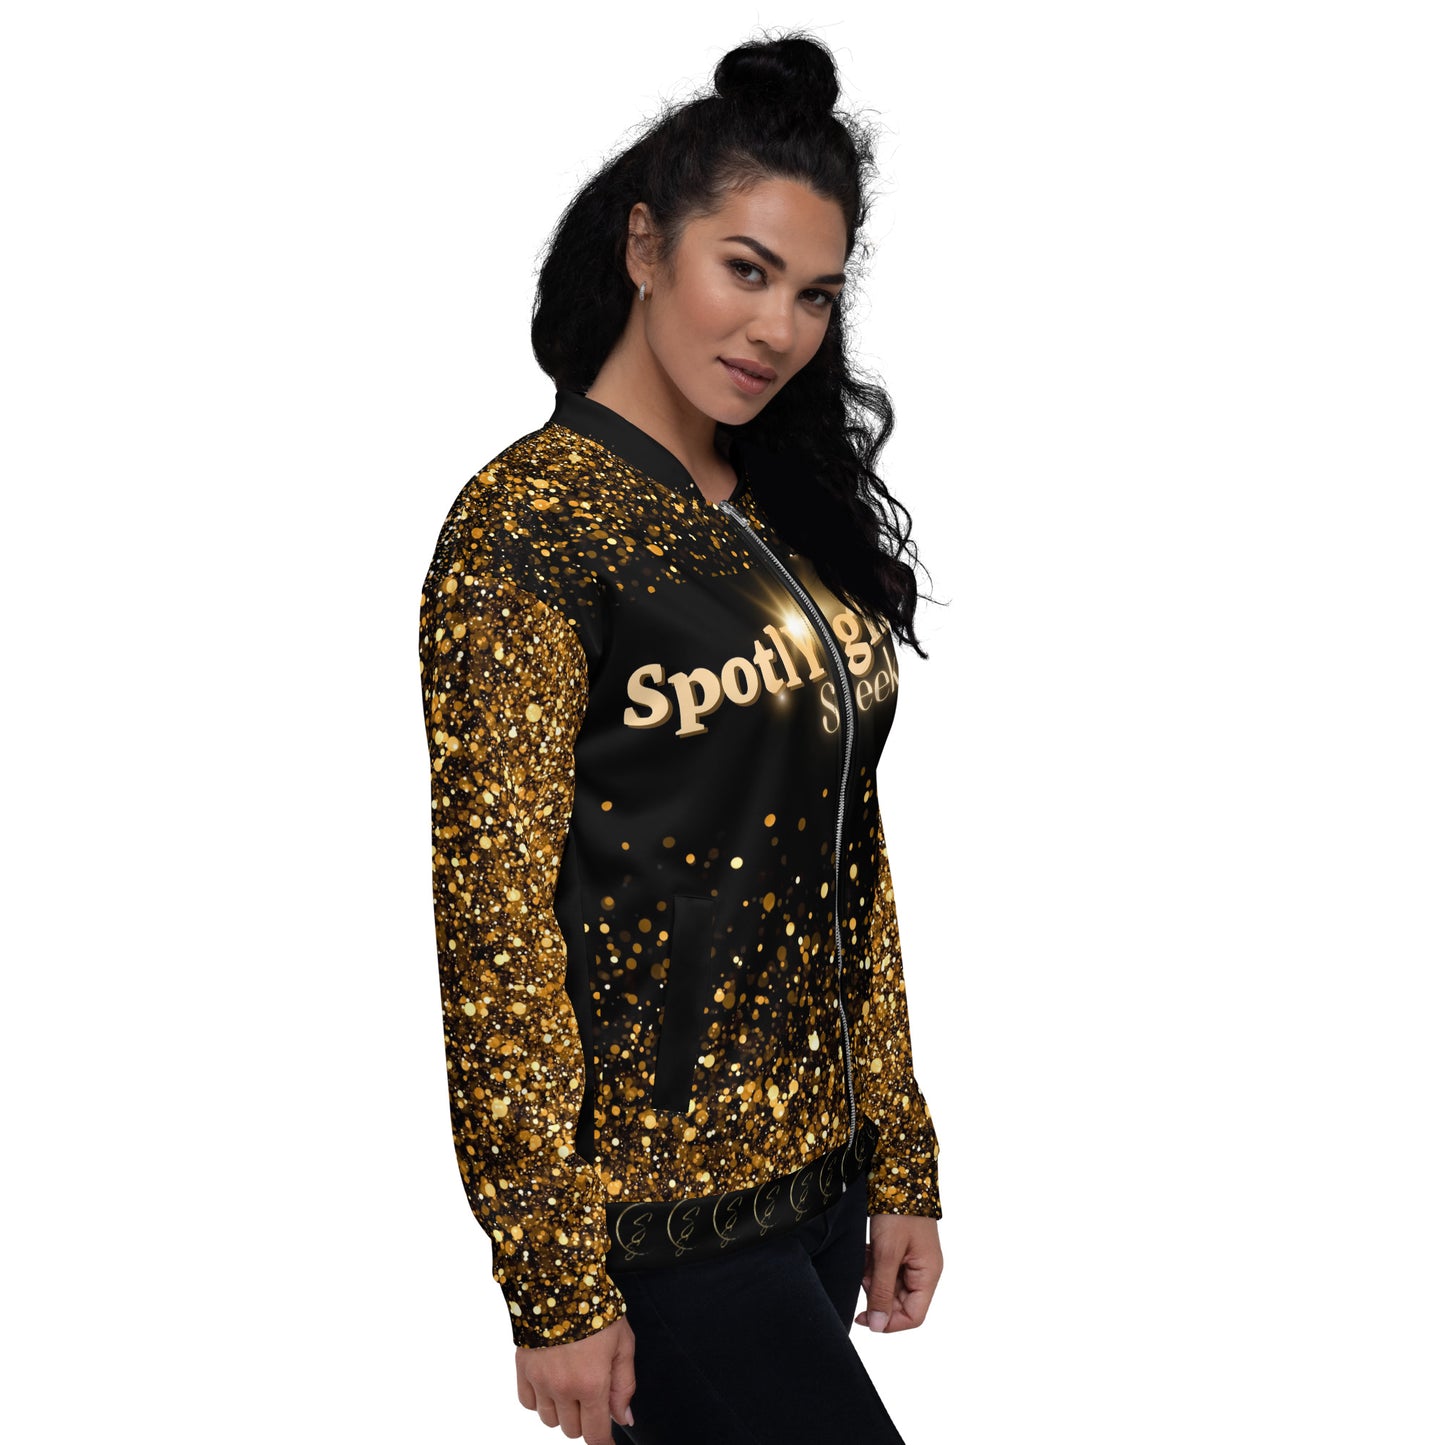 Unisex Bomber Jacket in dazzling sequin-simulated design, perfect for adding sparkle to your style.  For the artist whose birthright is the spotlight.